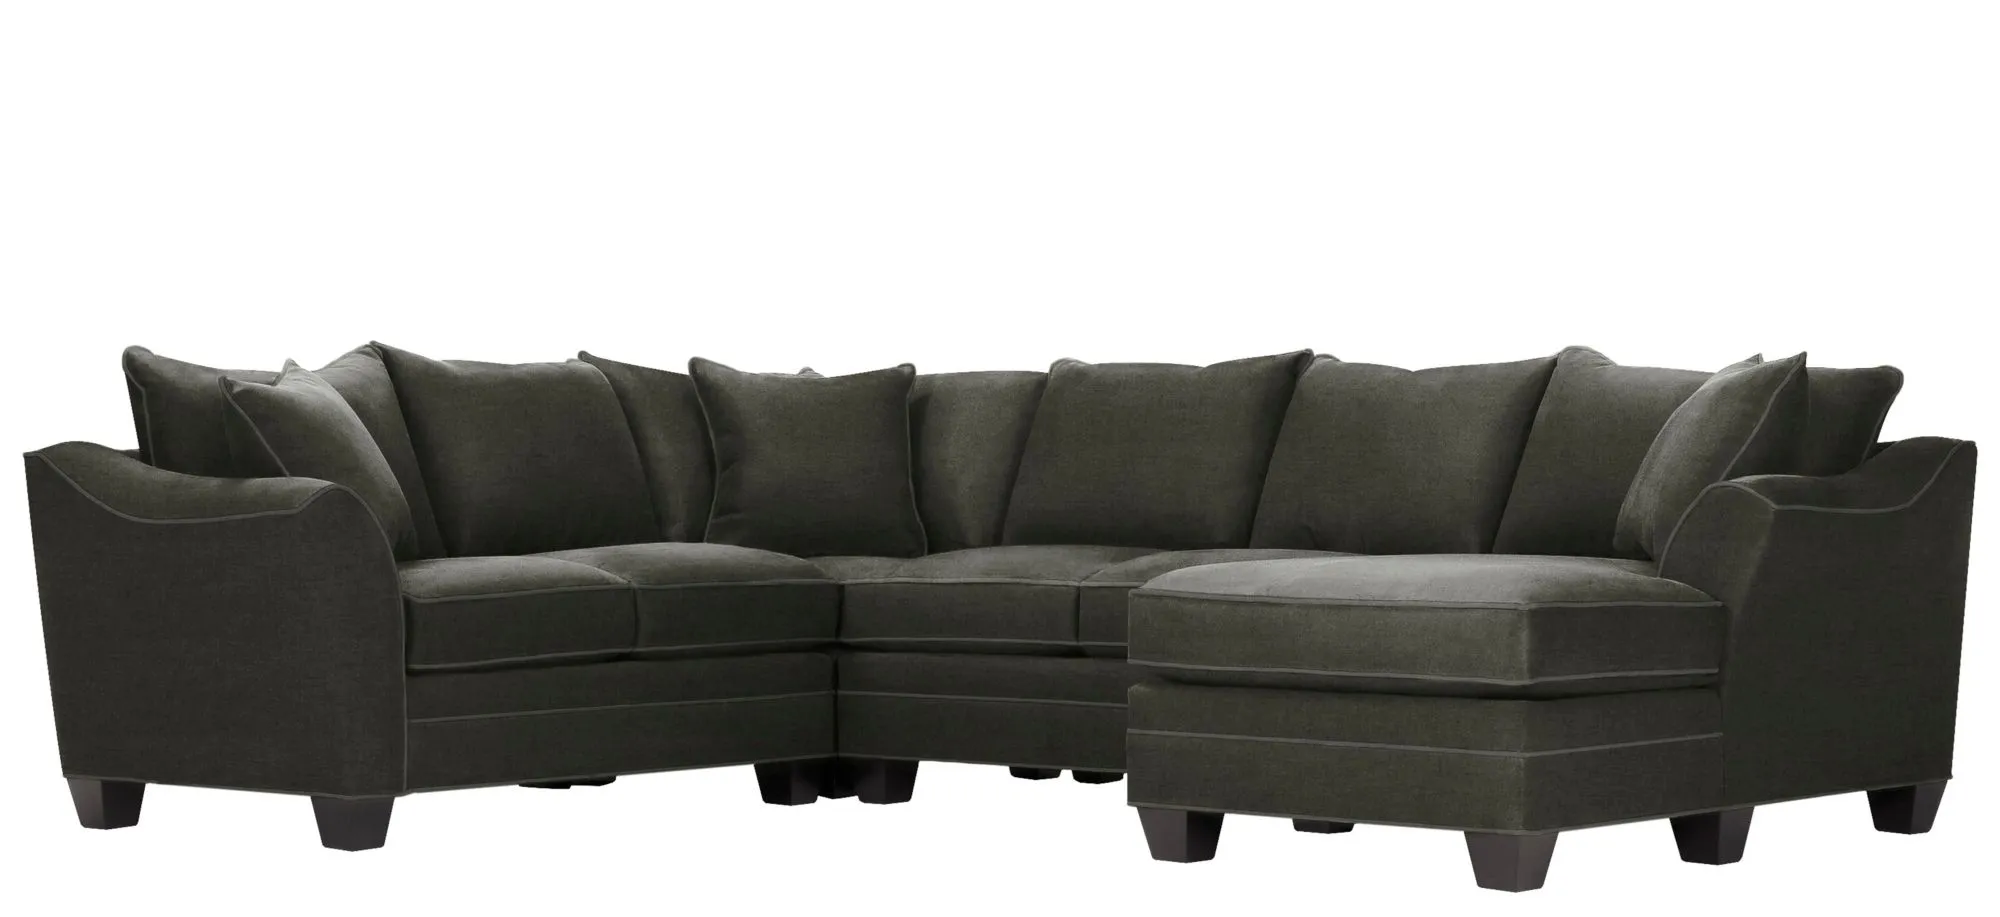 Foresthill 4-pc. Sectional w/ Right Arm Facing Chaise in Santa Rosa Slate by H.M. Richards